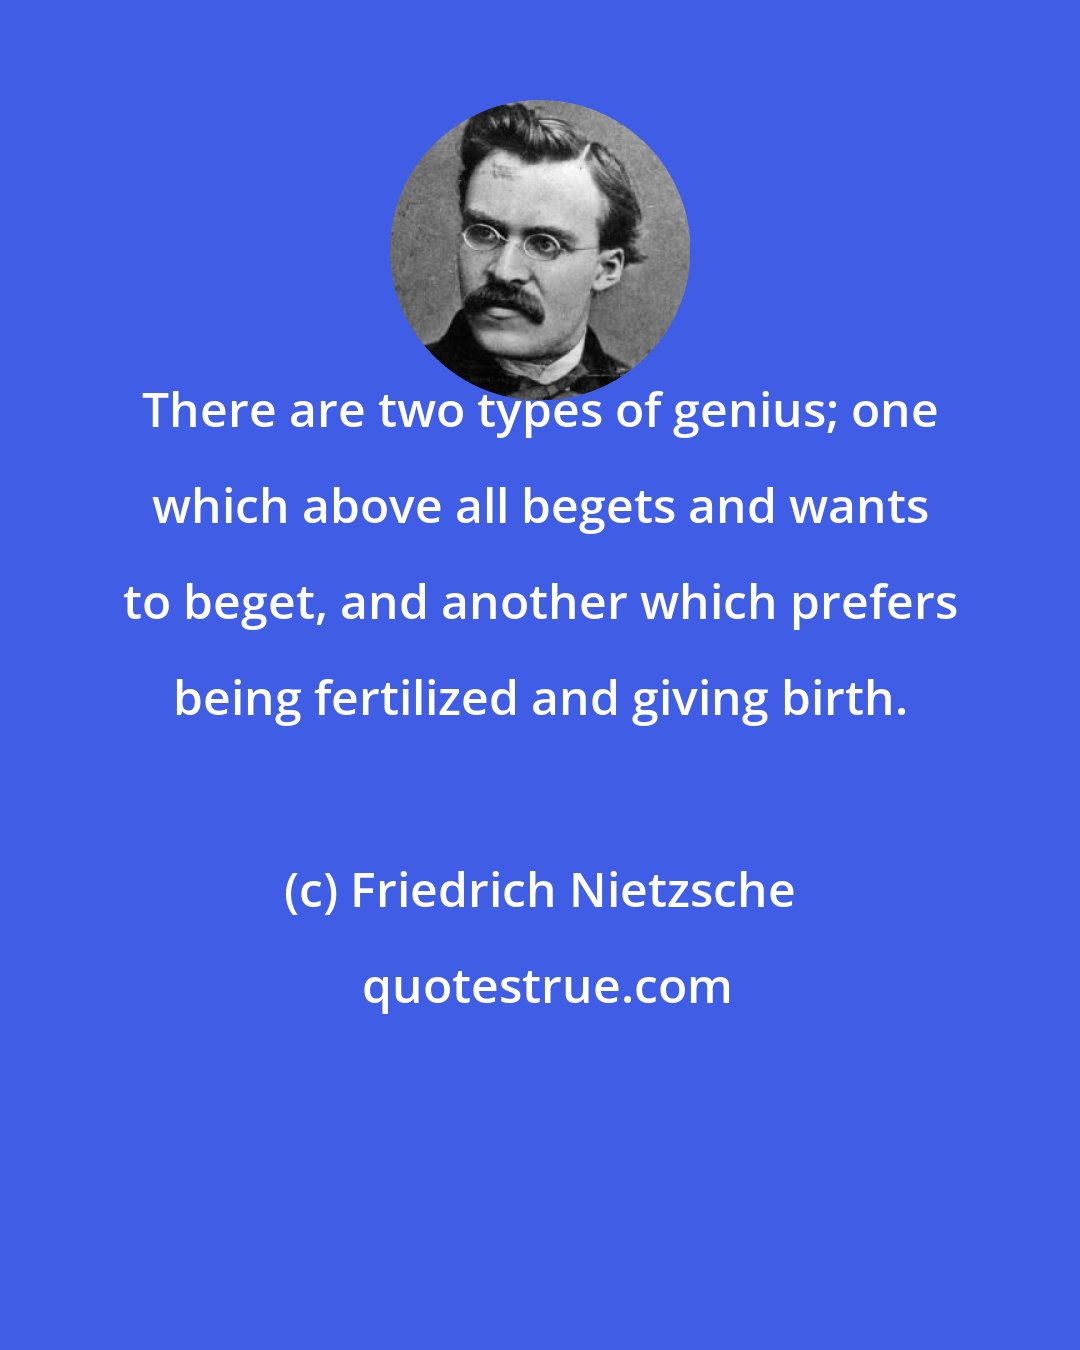 Friedrich Nietzsche: There are two types of genius; one which above all begets and wants to beget, and another which prefers being fertilized and giving birth.